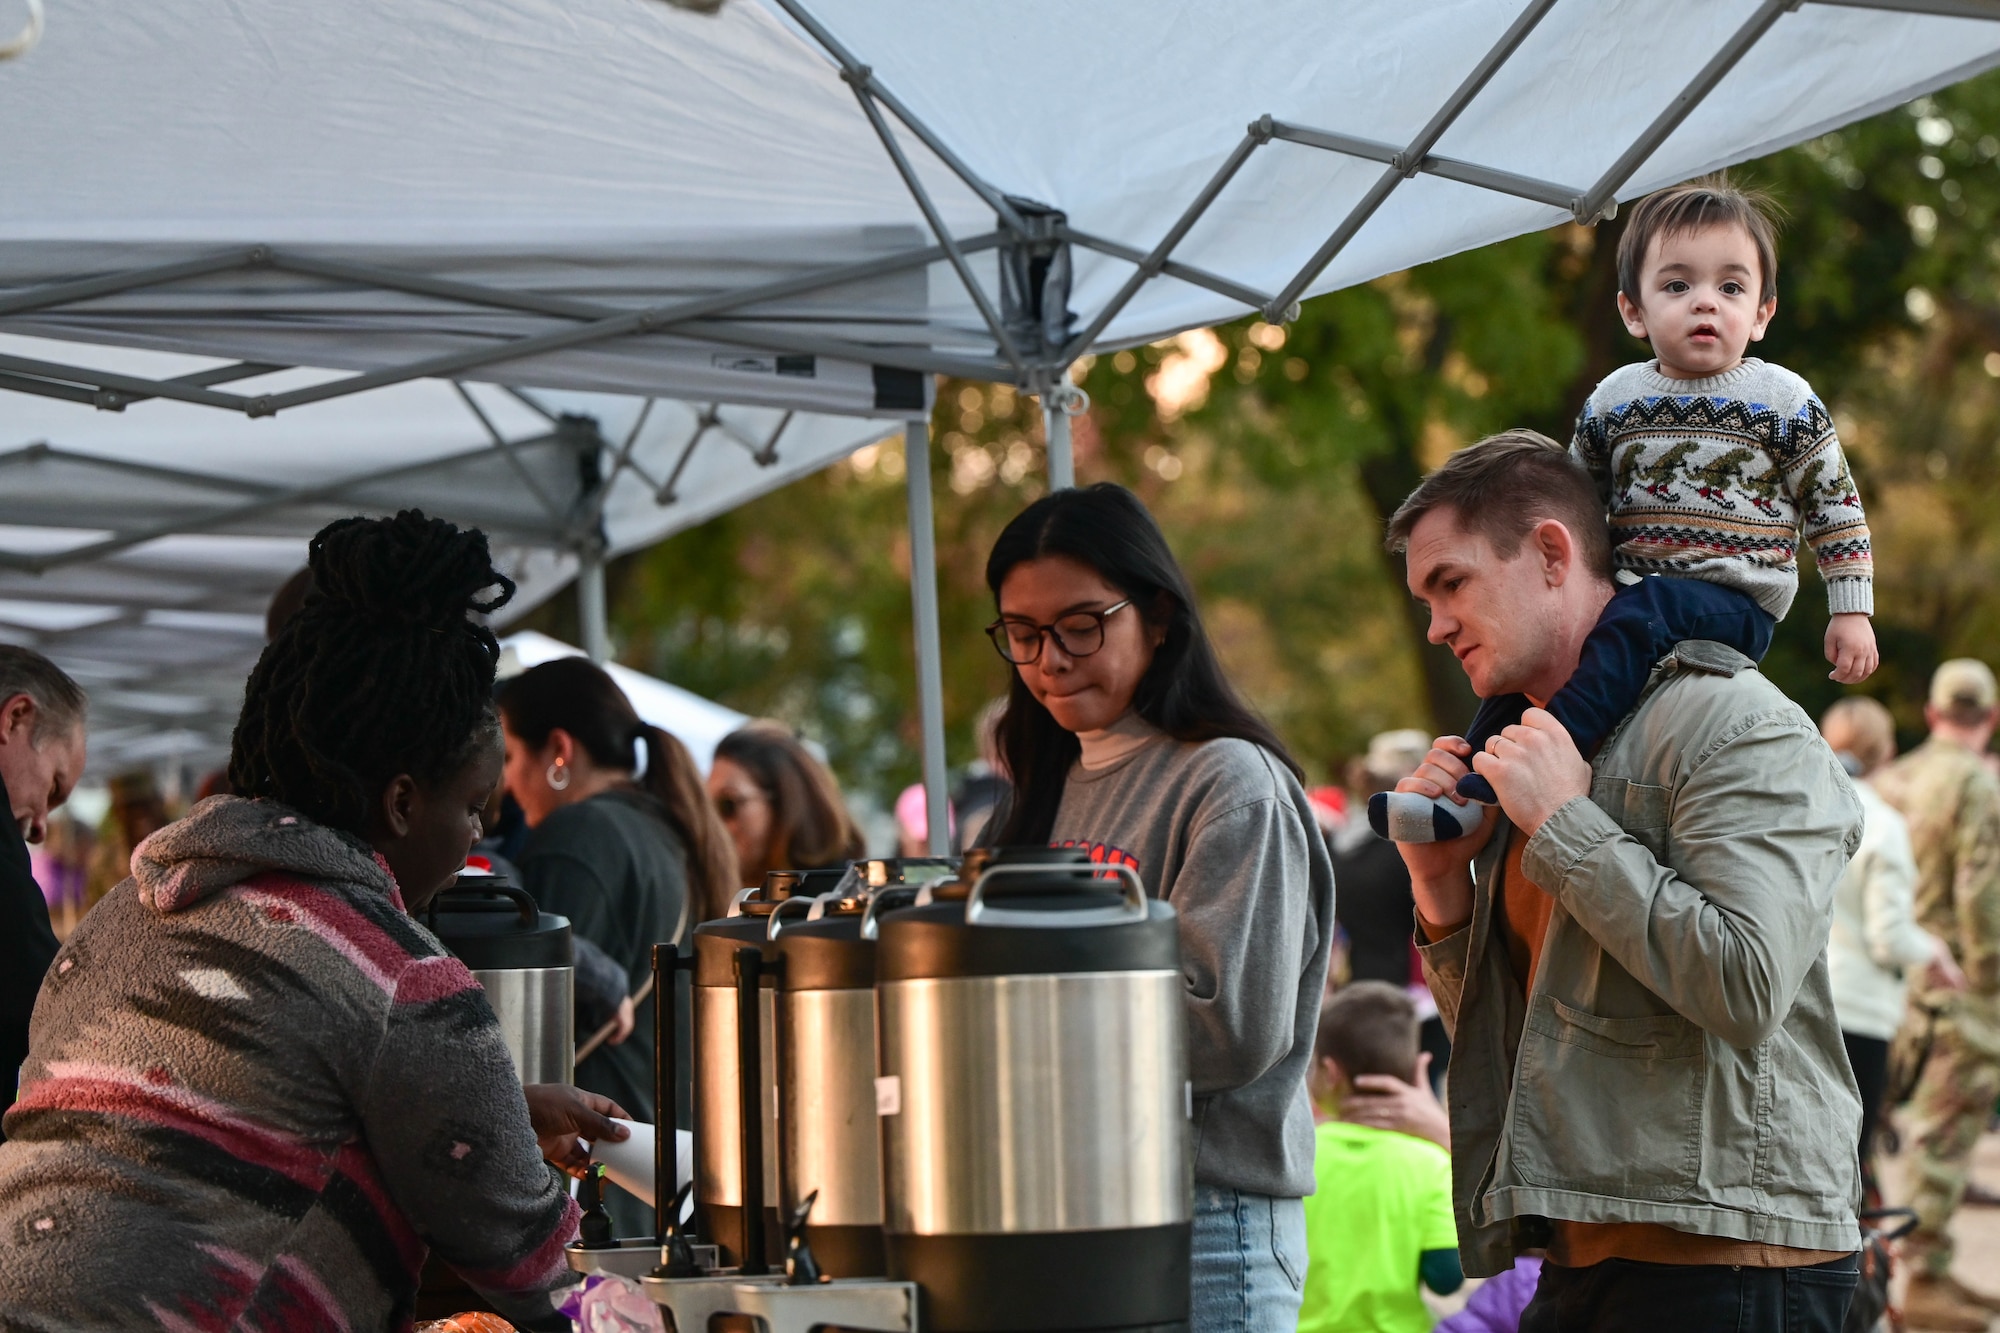 A woman prepares a hot chocolate for a family who is at her booth